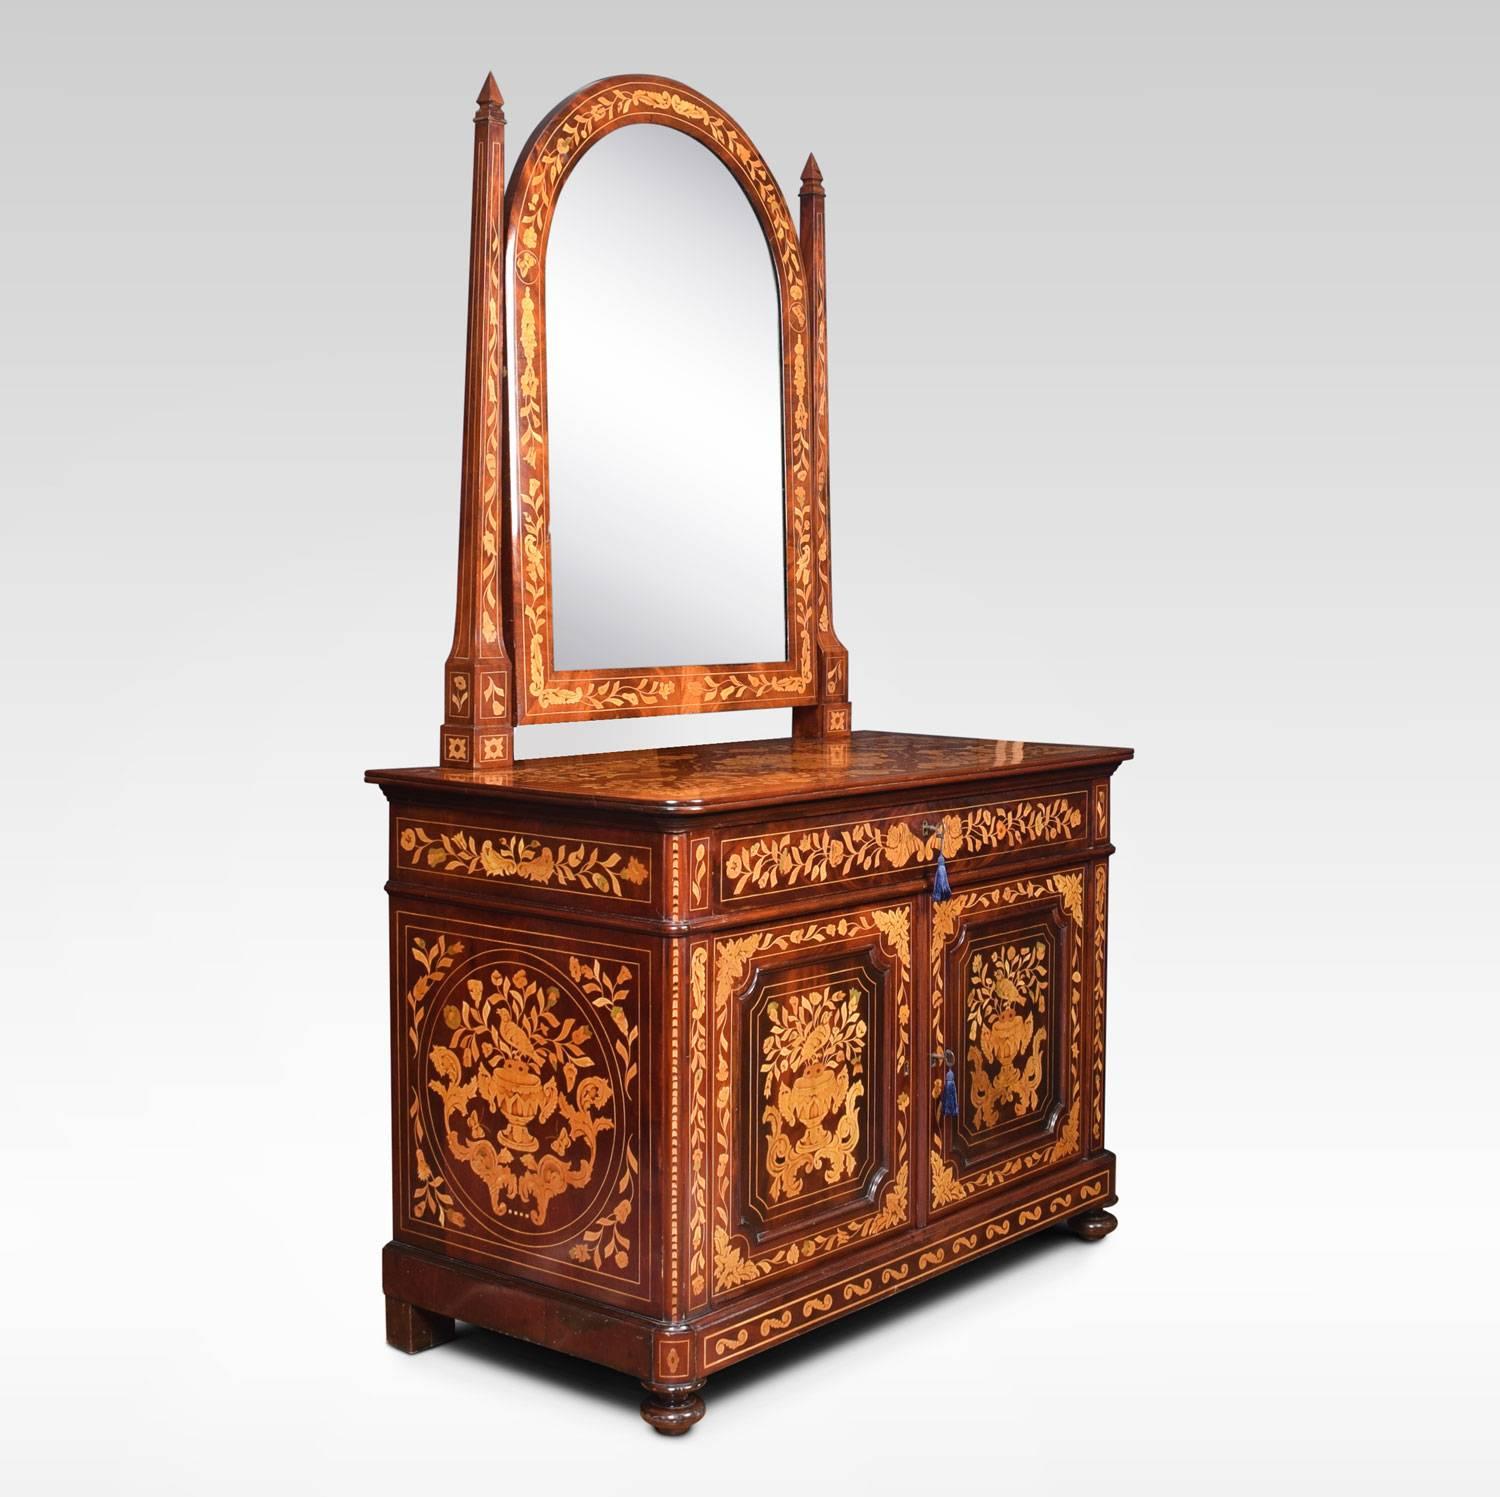 A Dutch mahogany and marquetry inlaid dressing table the arched mirror between tapered uprights to the base section fitted with long freeze drawer over a pair of cupboard doors with floral, bird, and urn marquetry, opening to reveal shelved